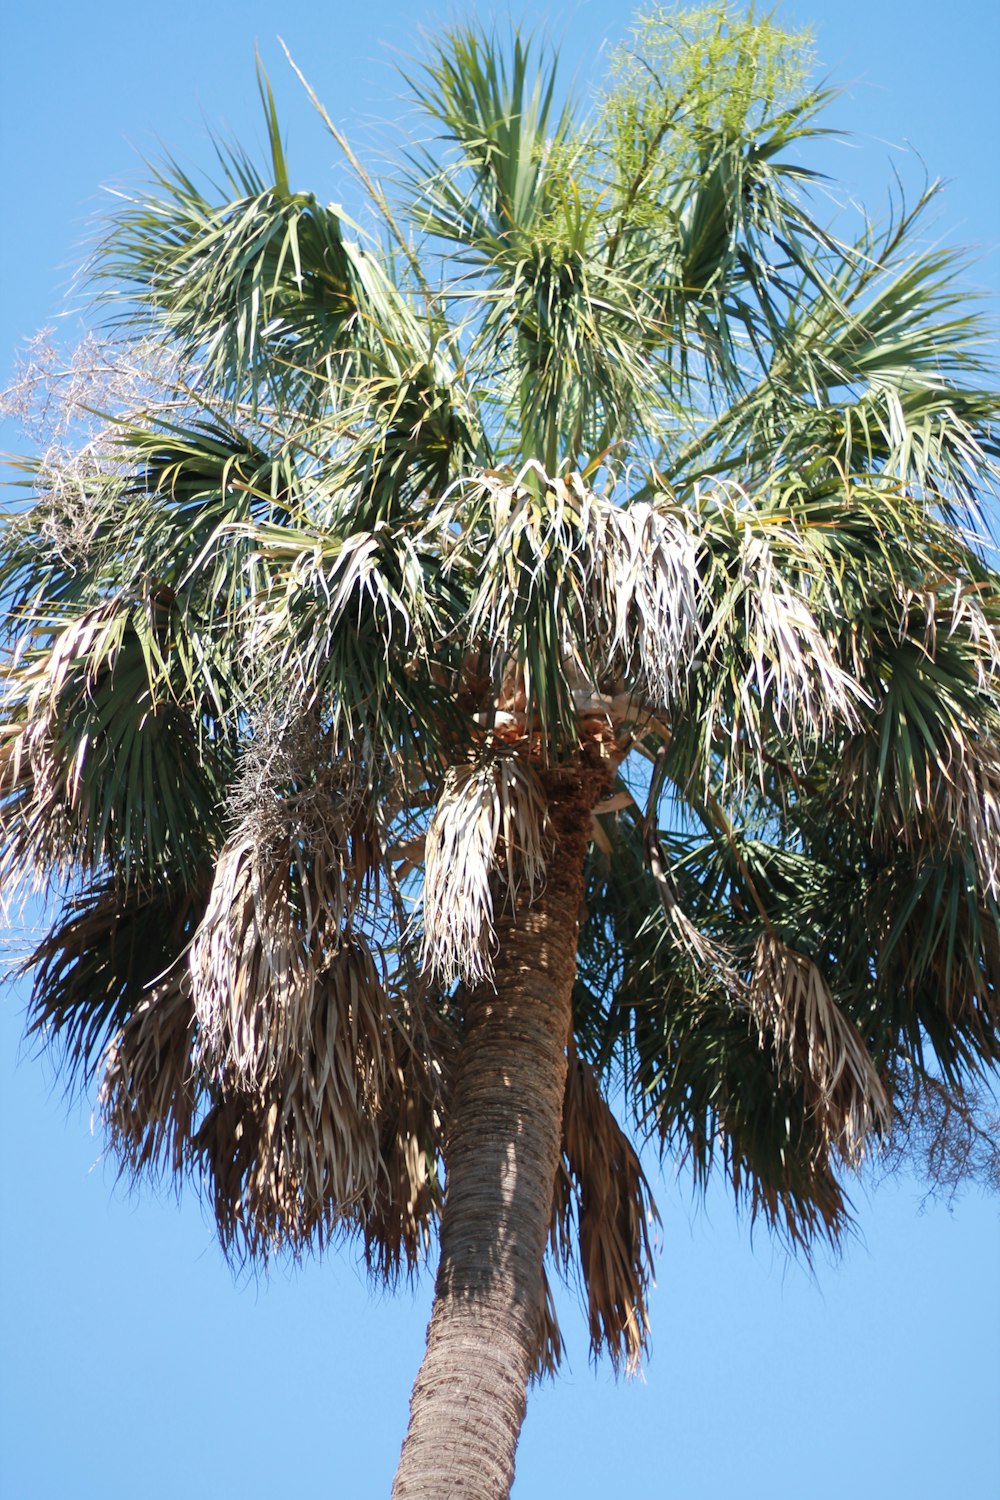 a palm tree with lots of green leaves